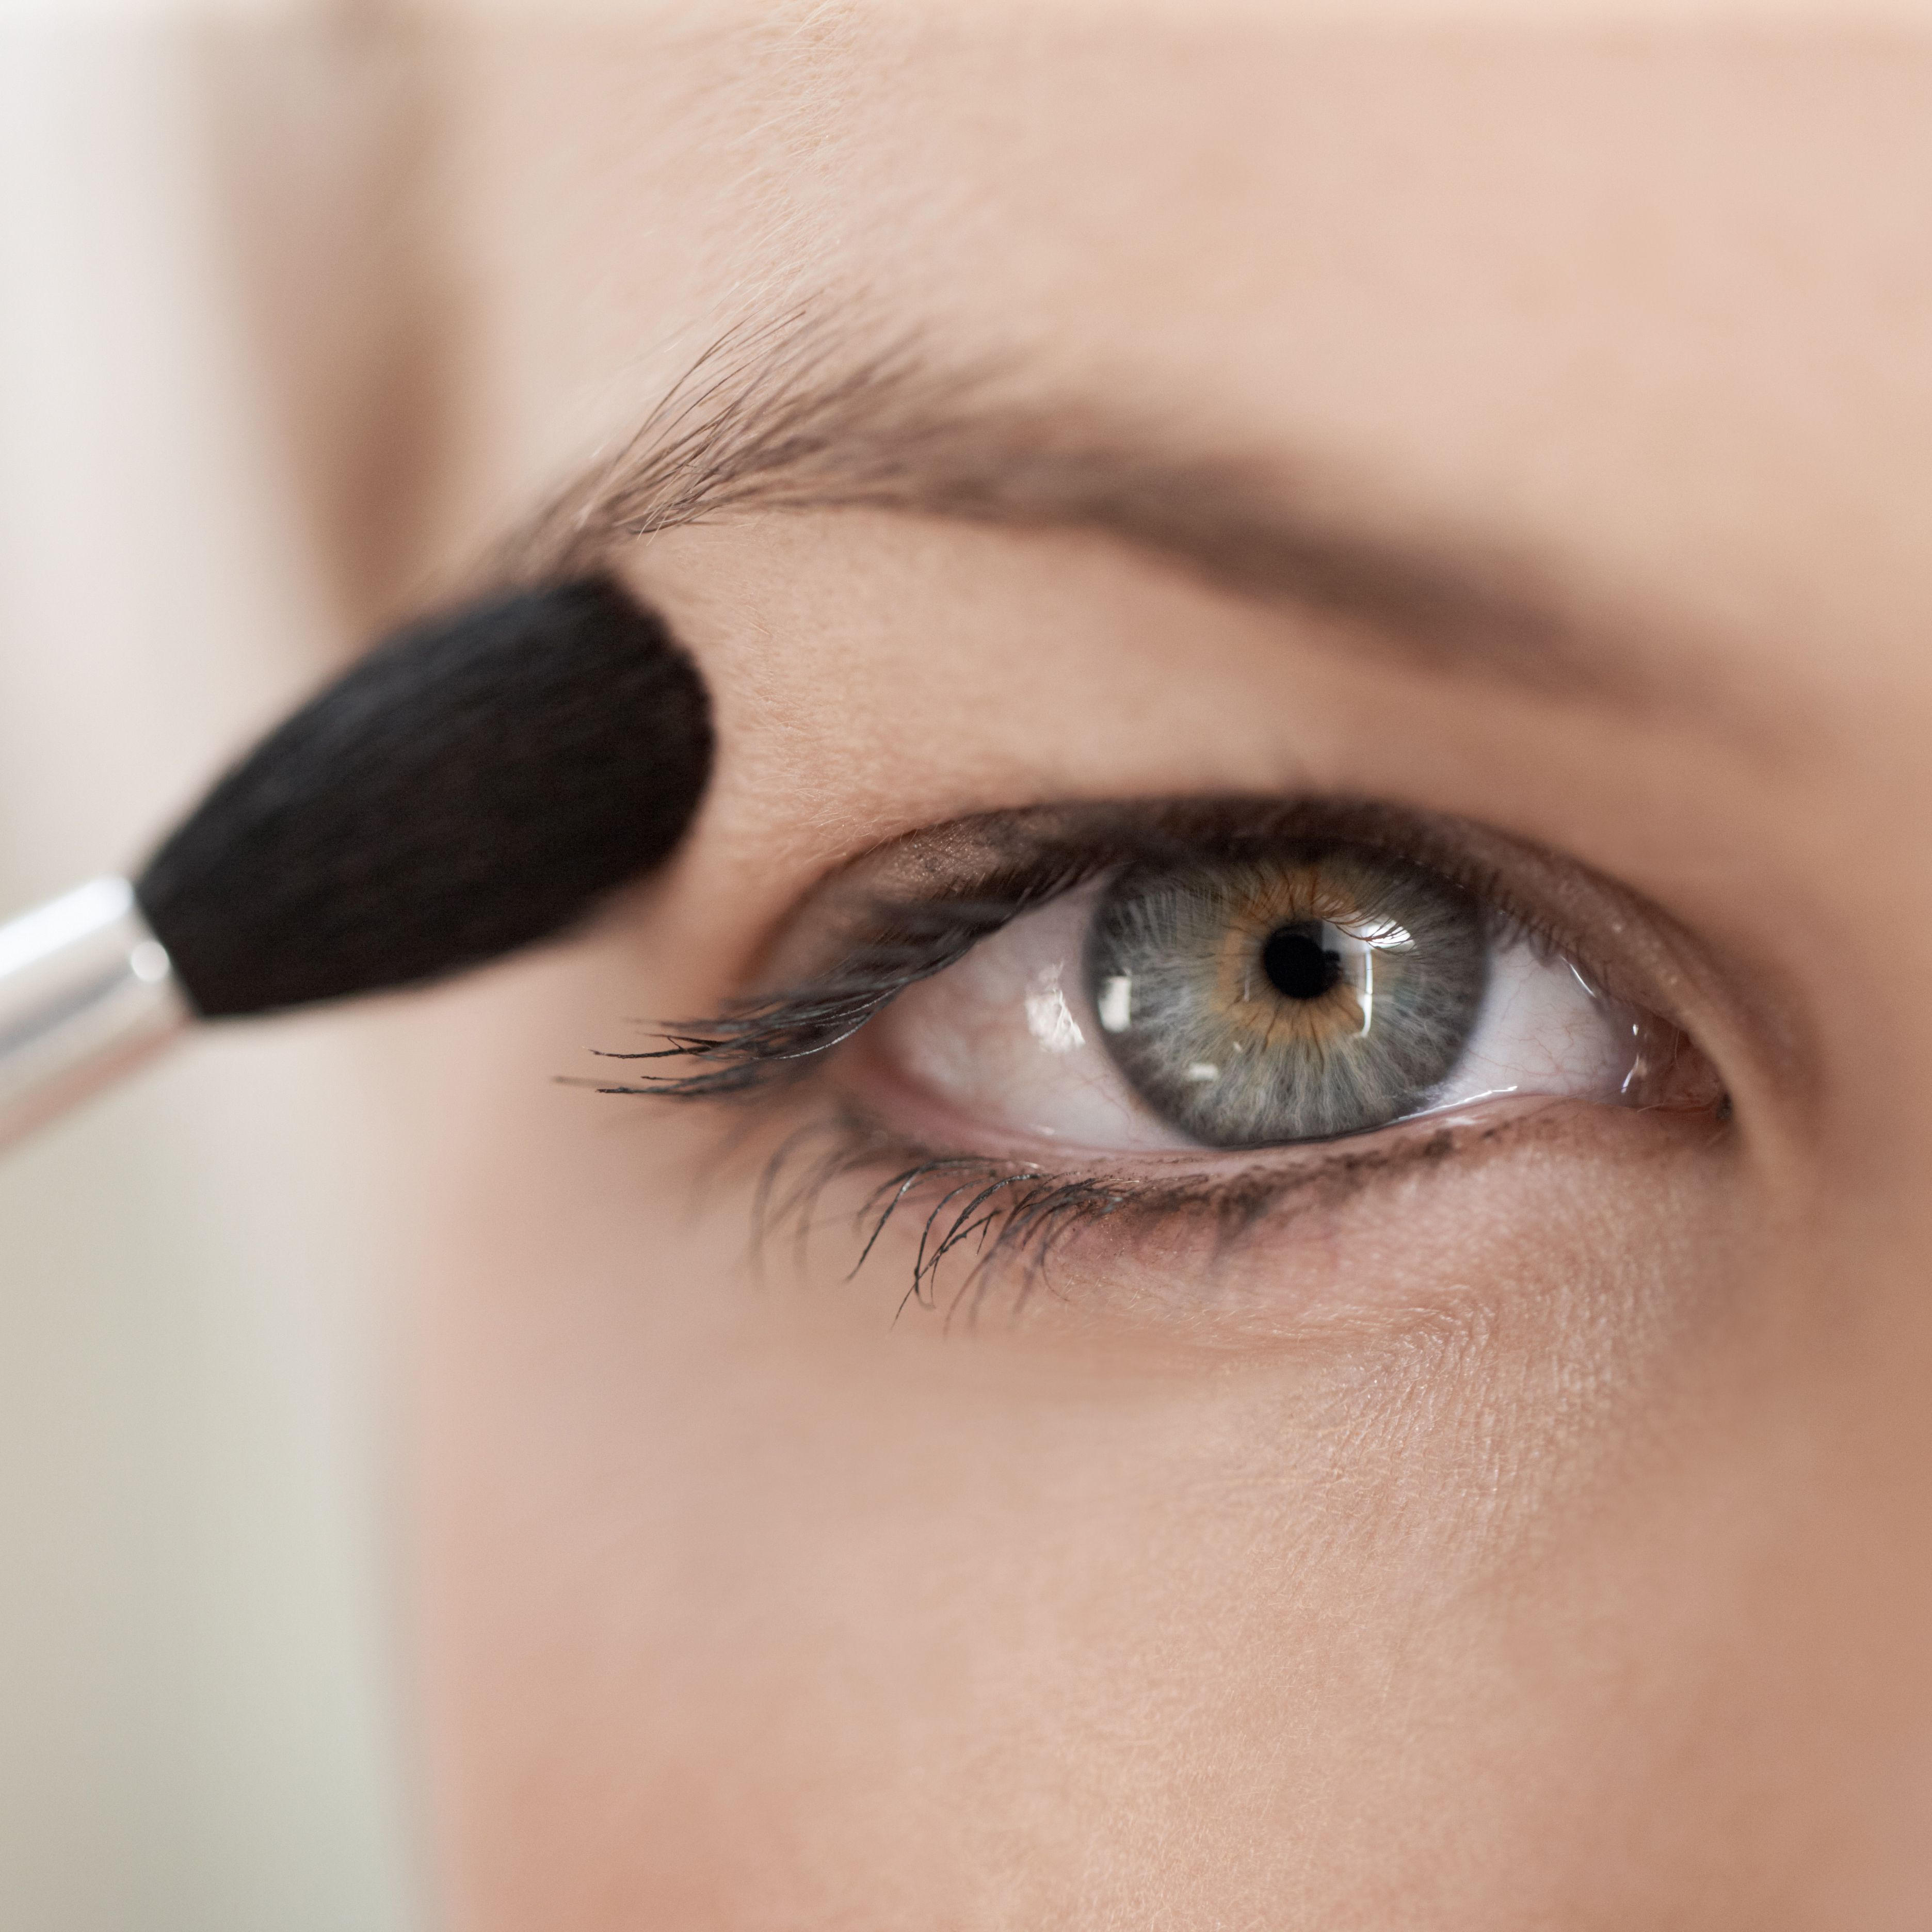 Makeup For Small Brown Eyes Makeup Tricks For Hooded Eyes Hooded Eyes Makeup Tips And Tricks